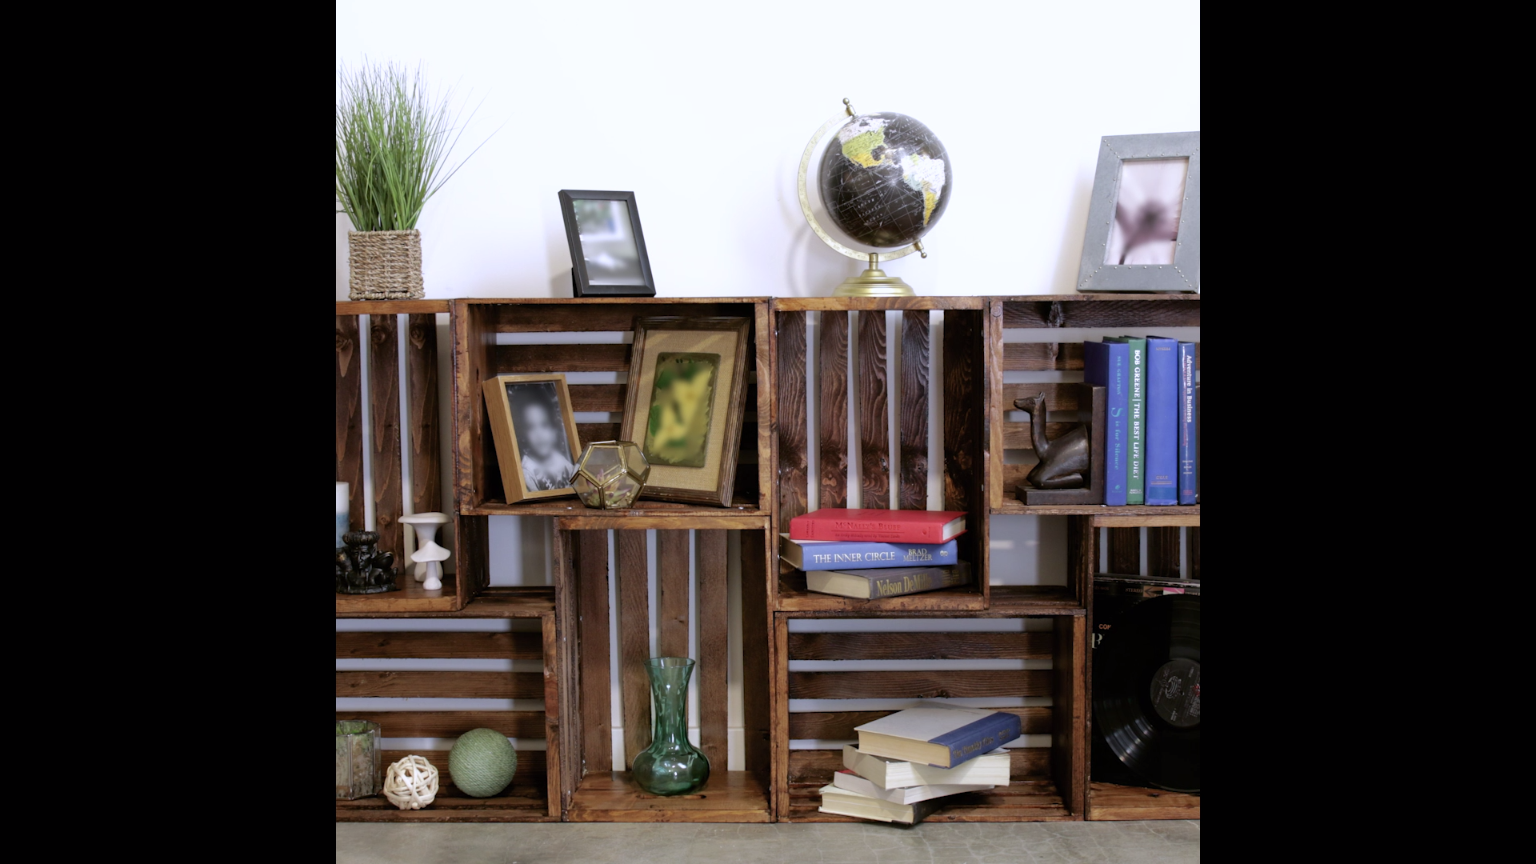 Repurpose Old Wooden Crates With This Clever Bookshelf DIY -   17 DIY Crate Bookshelf ideas